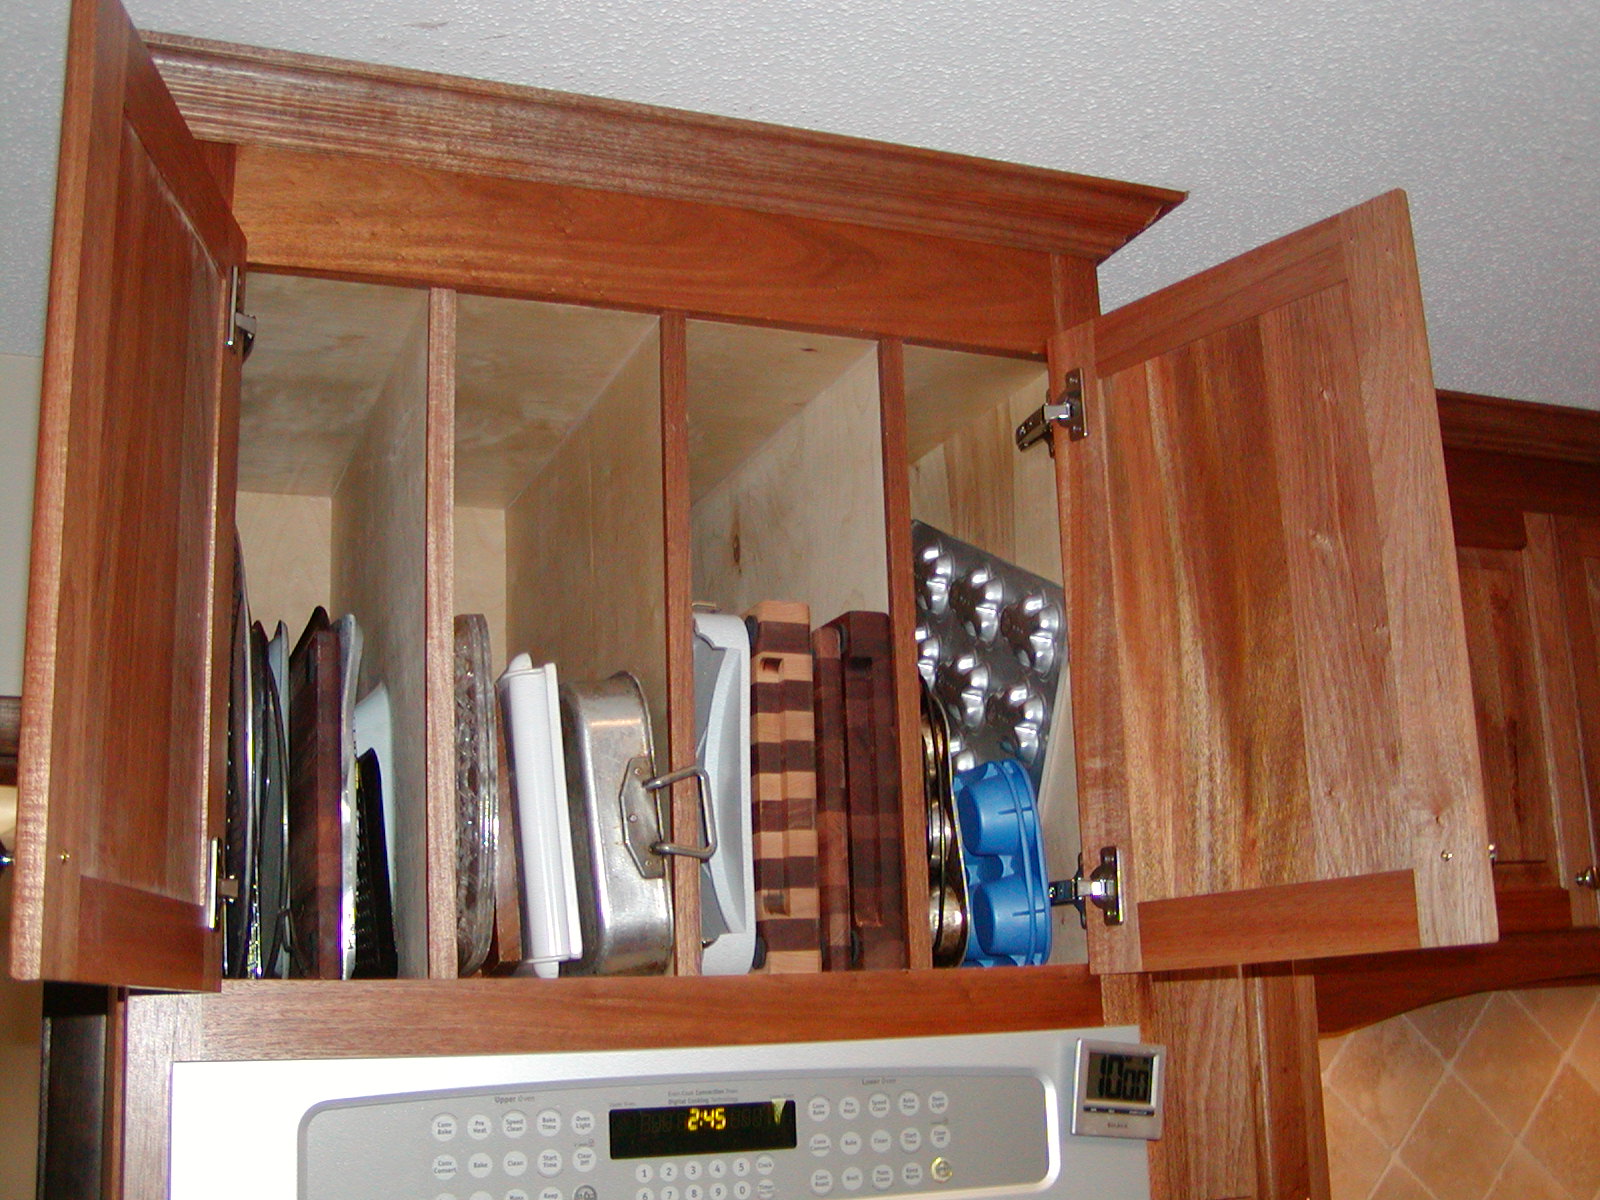 Tray Dividers — 336-342-9268 — J & S Home Builders and Cabinetry